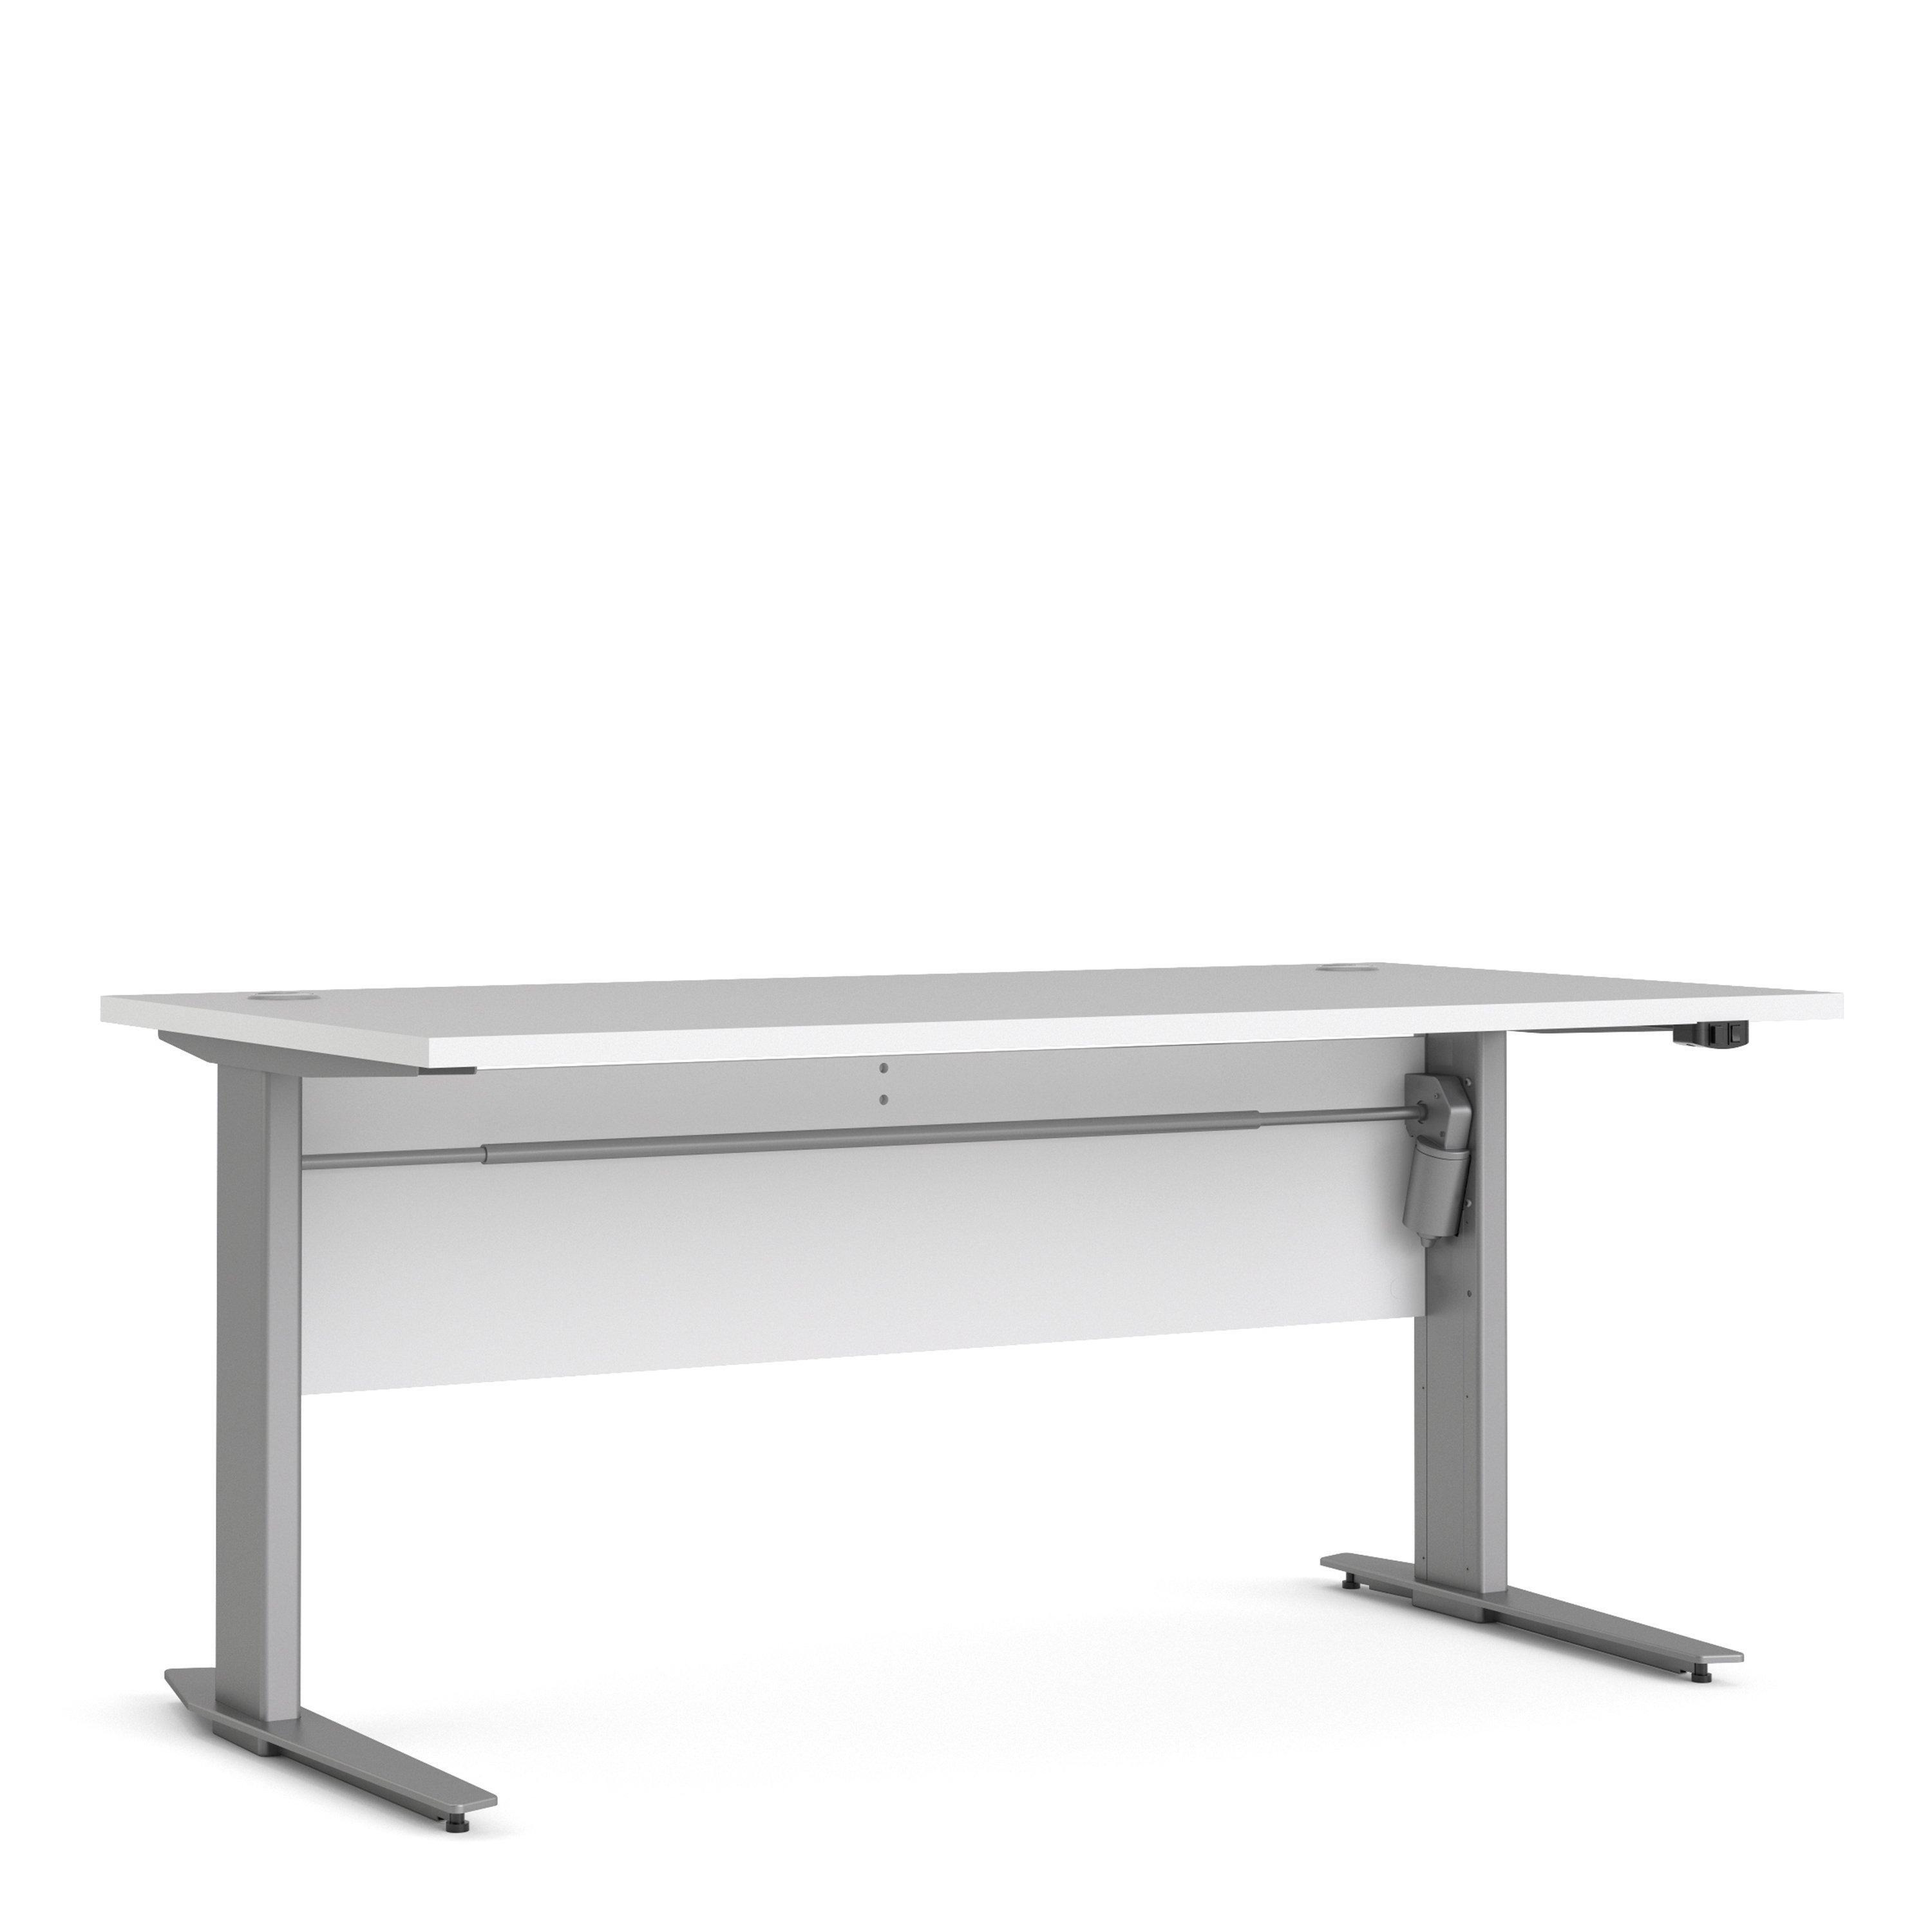 Prima Desk 150cm with Height Adjustable Legs with Electric control - image 1